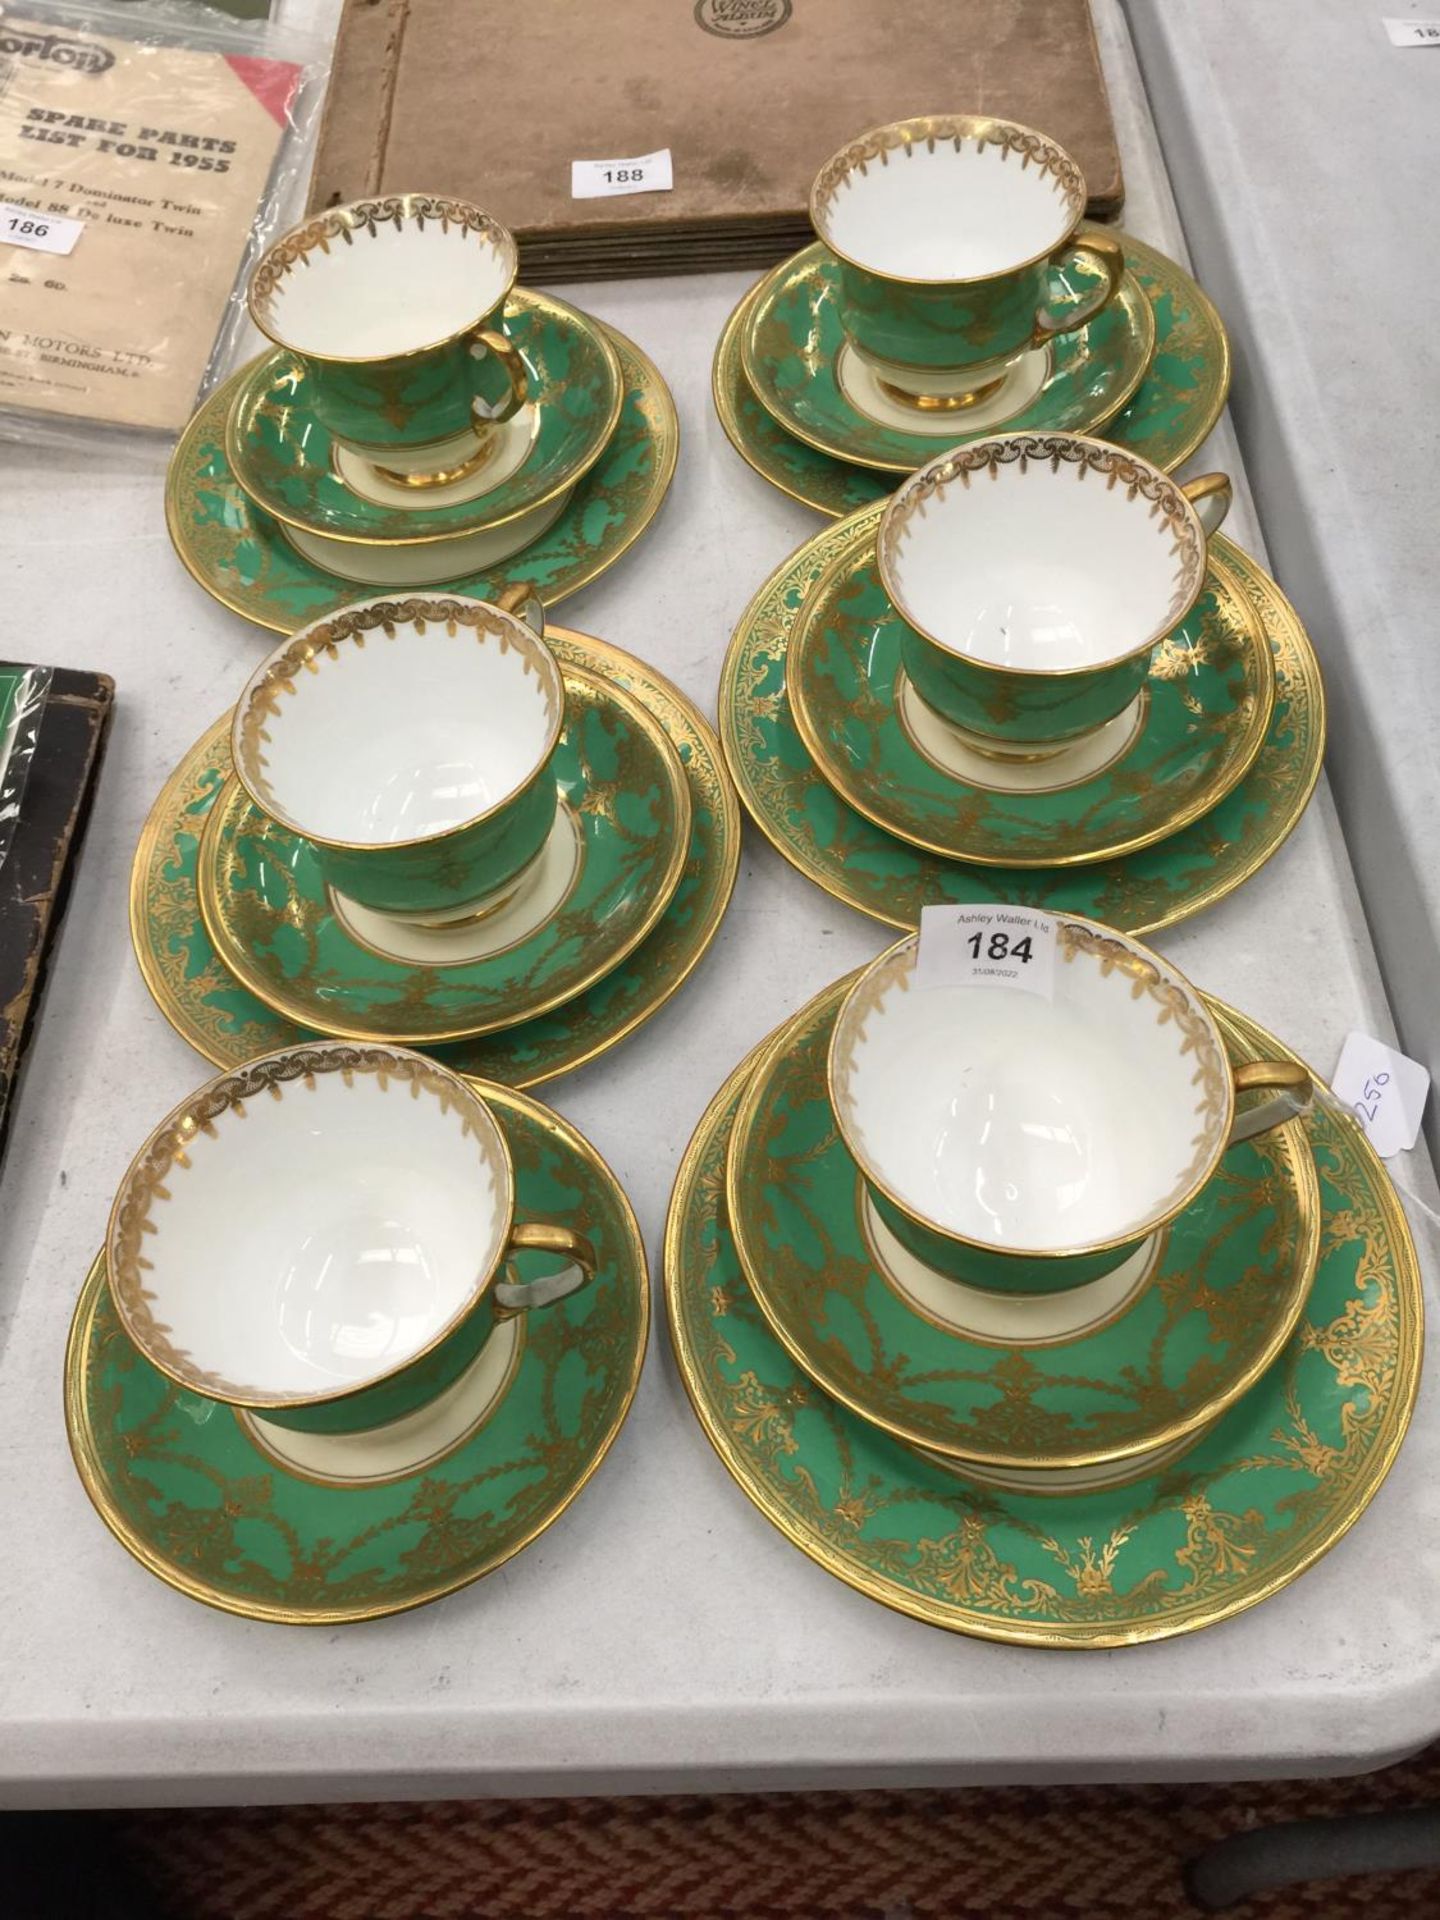 FIVE AYNSLEY GREEN AND GILT TRIOS PLUS A CUPA AND SAUCER